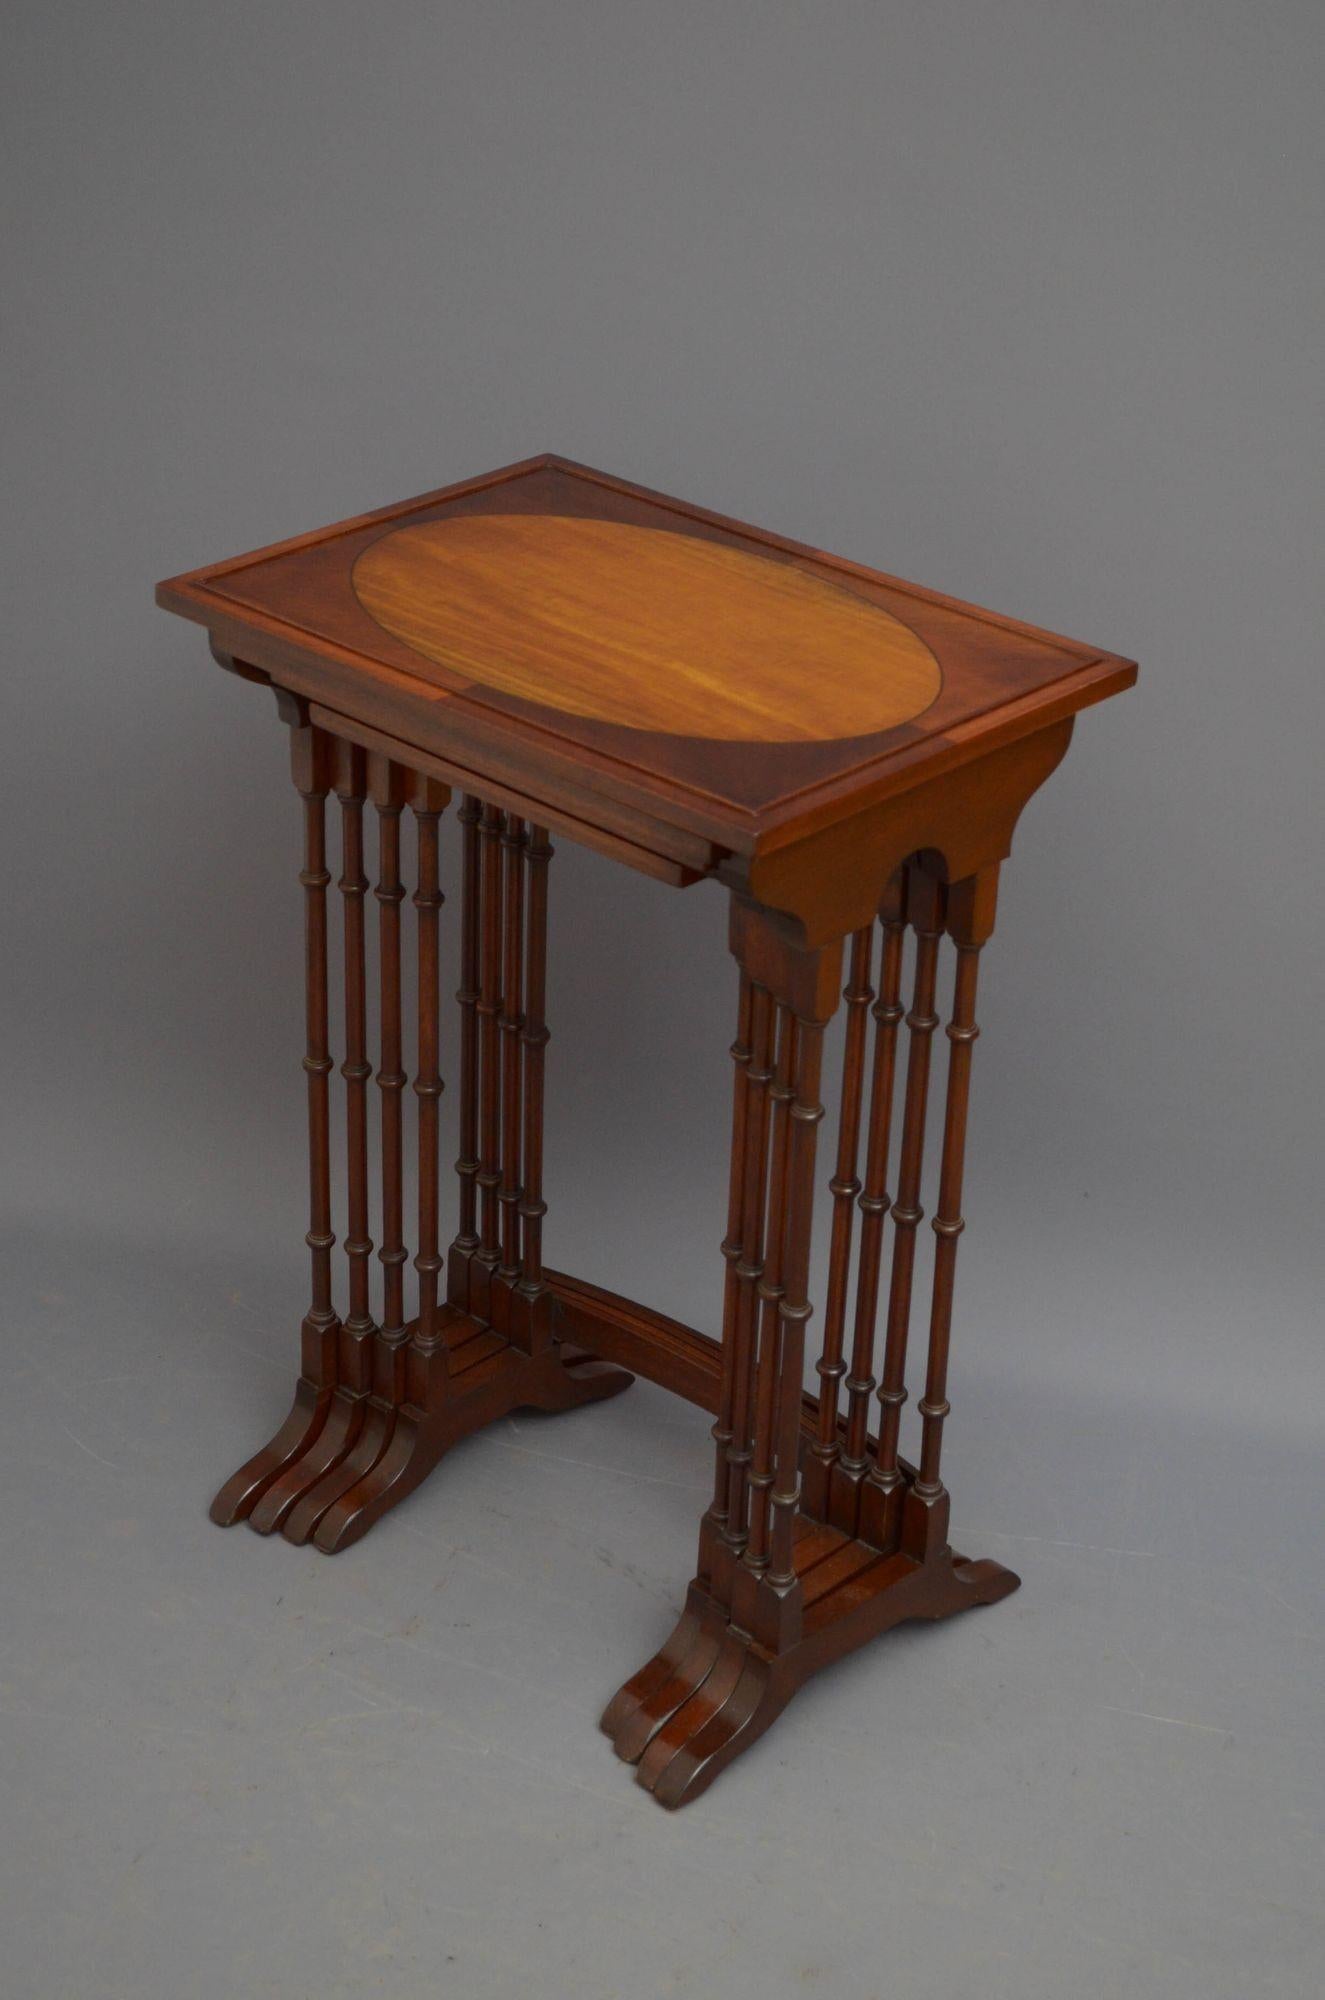 Sn5535 Attractive Edwardian quartetto nest of tables, each having mahogany top with oval satinwood inlaid panel and a raised lip to the edge, each standing on four turned and ringed legs terminating in spayed feet. This antique nest of four tables